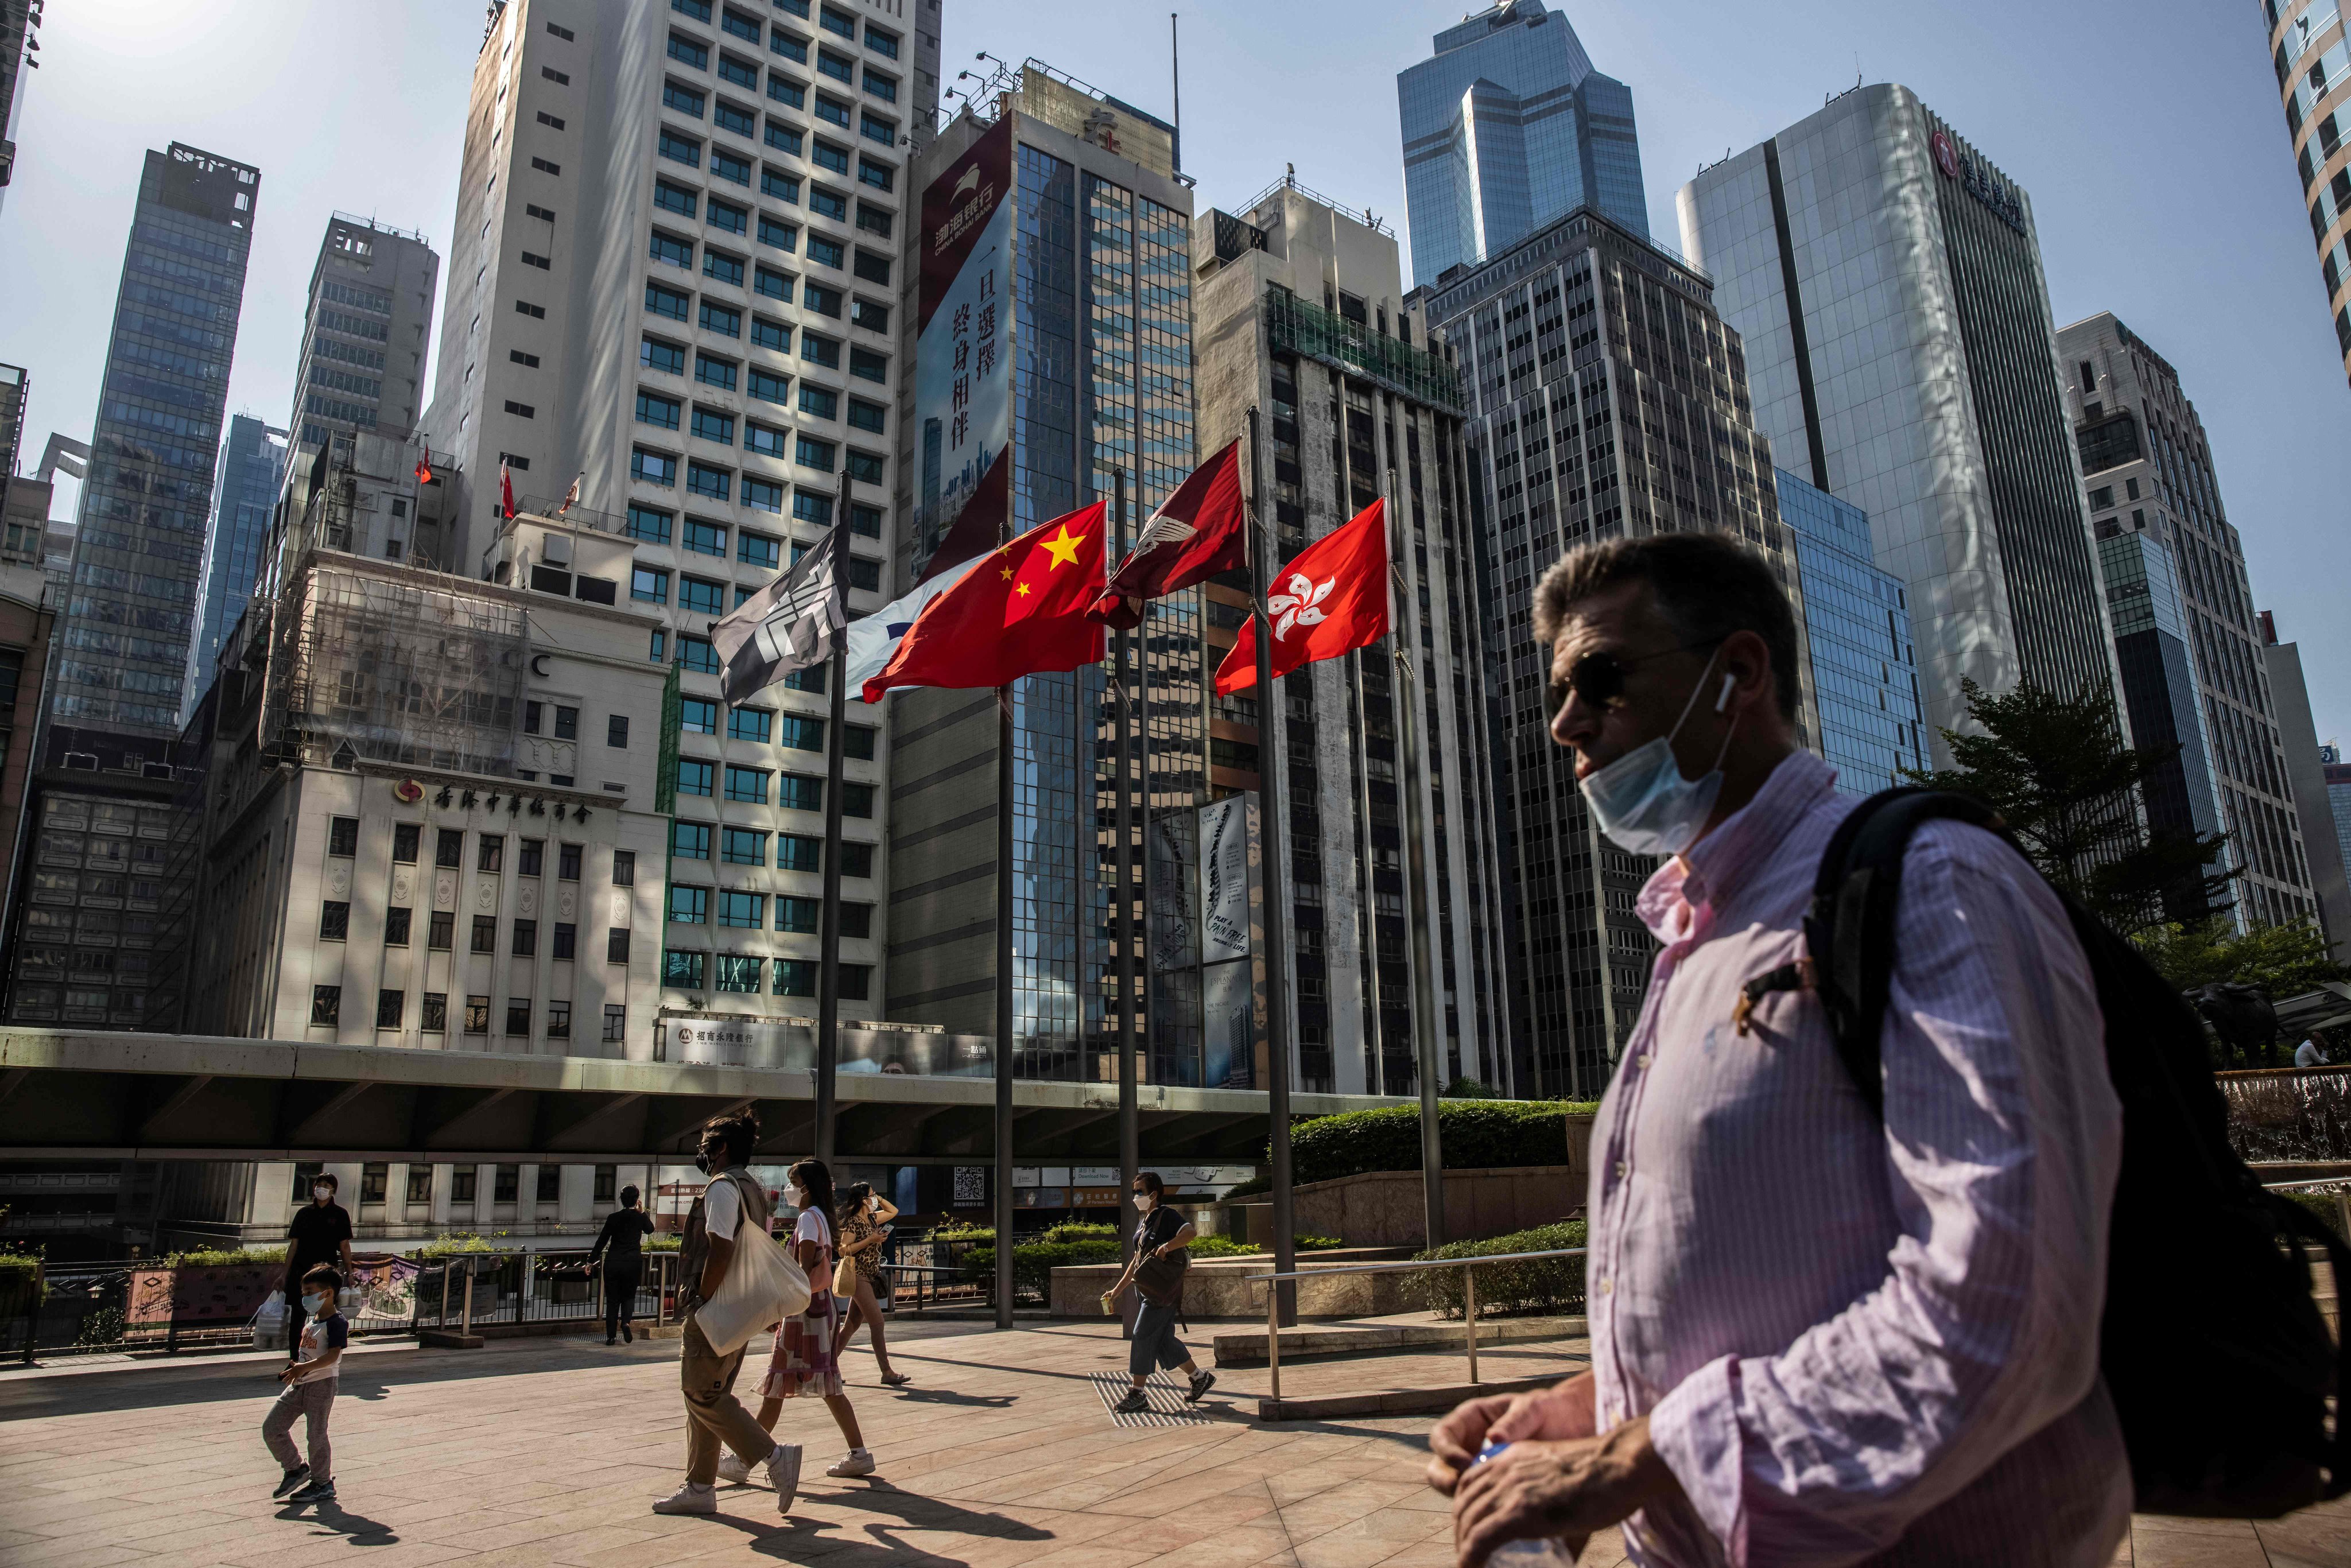 People walk through Exchange Square, the home of the Hong Kong stock exchange, on October 28 last year. Photo: AFP